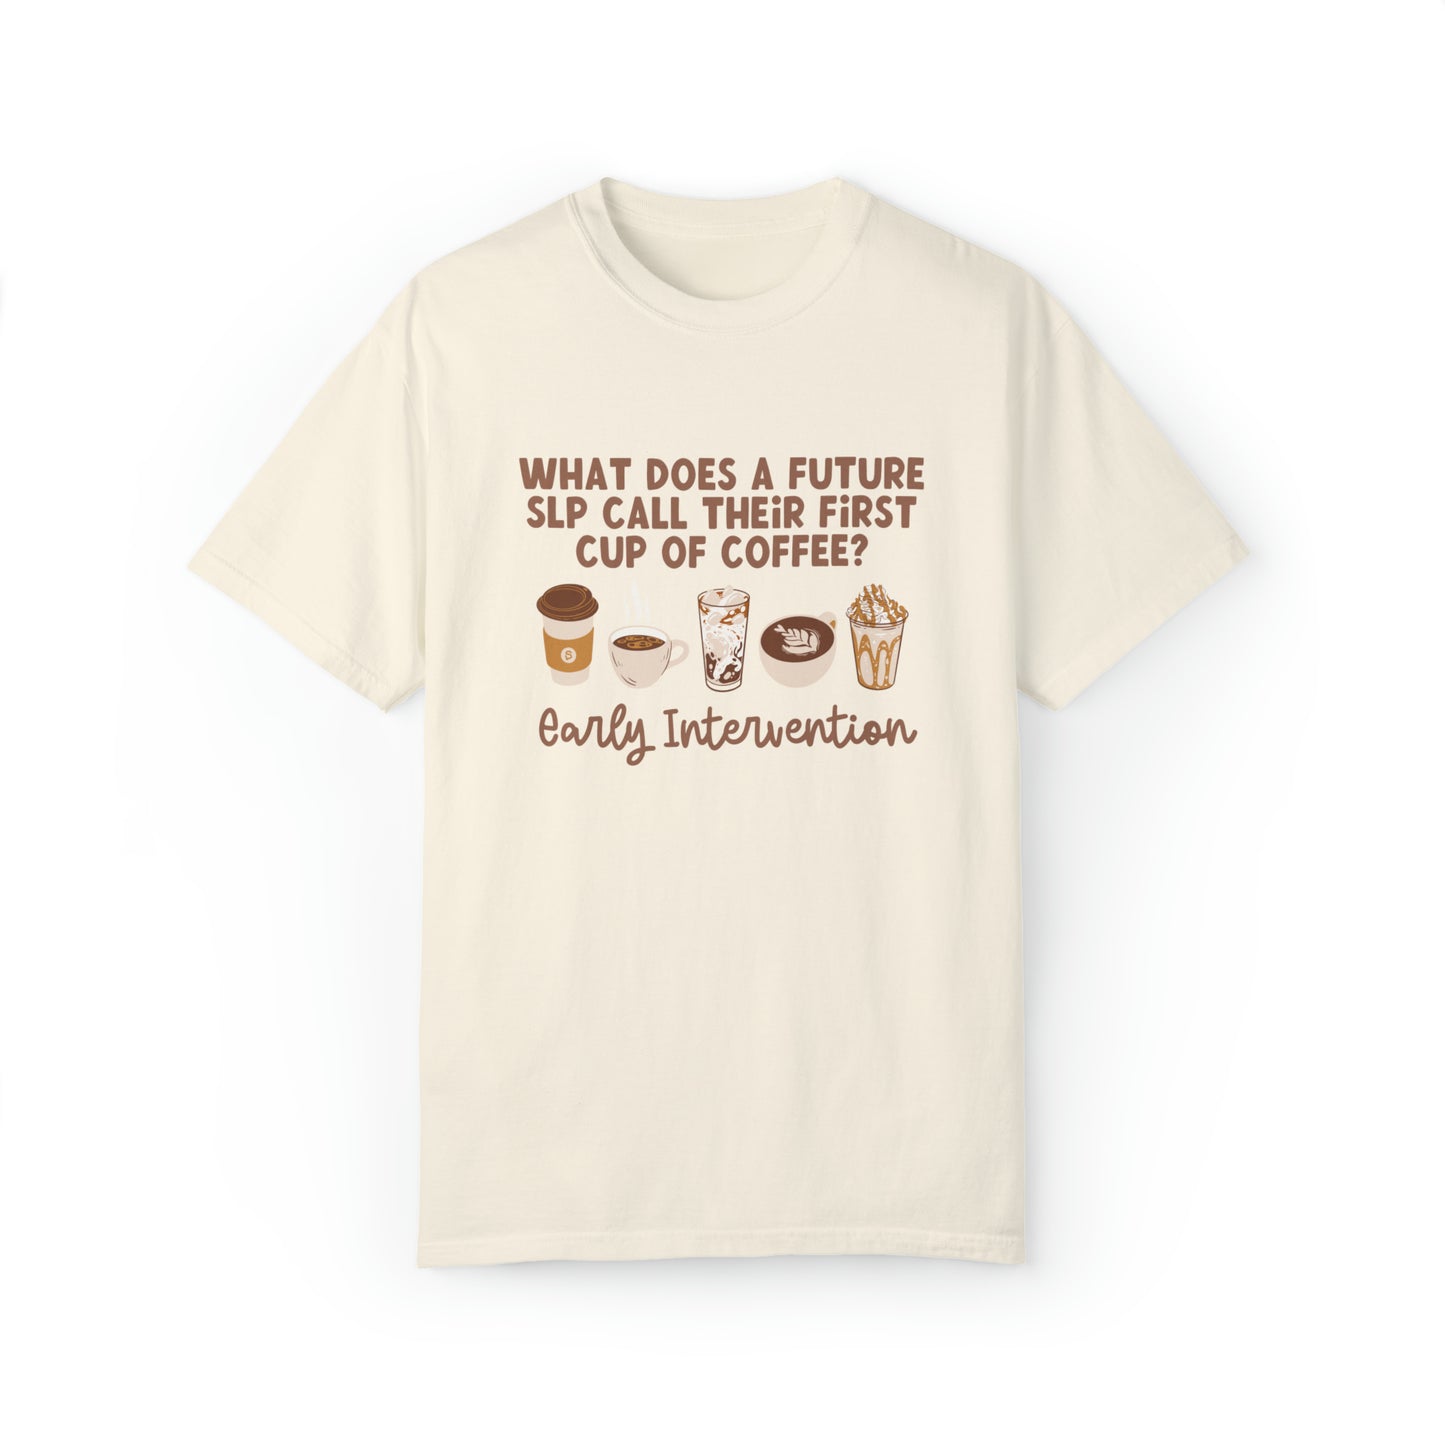 Load image into Gallery viewer, What Does A Future SLP Call Their First Cup of Coffee Tee
